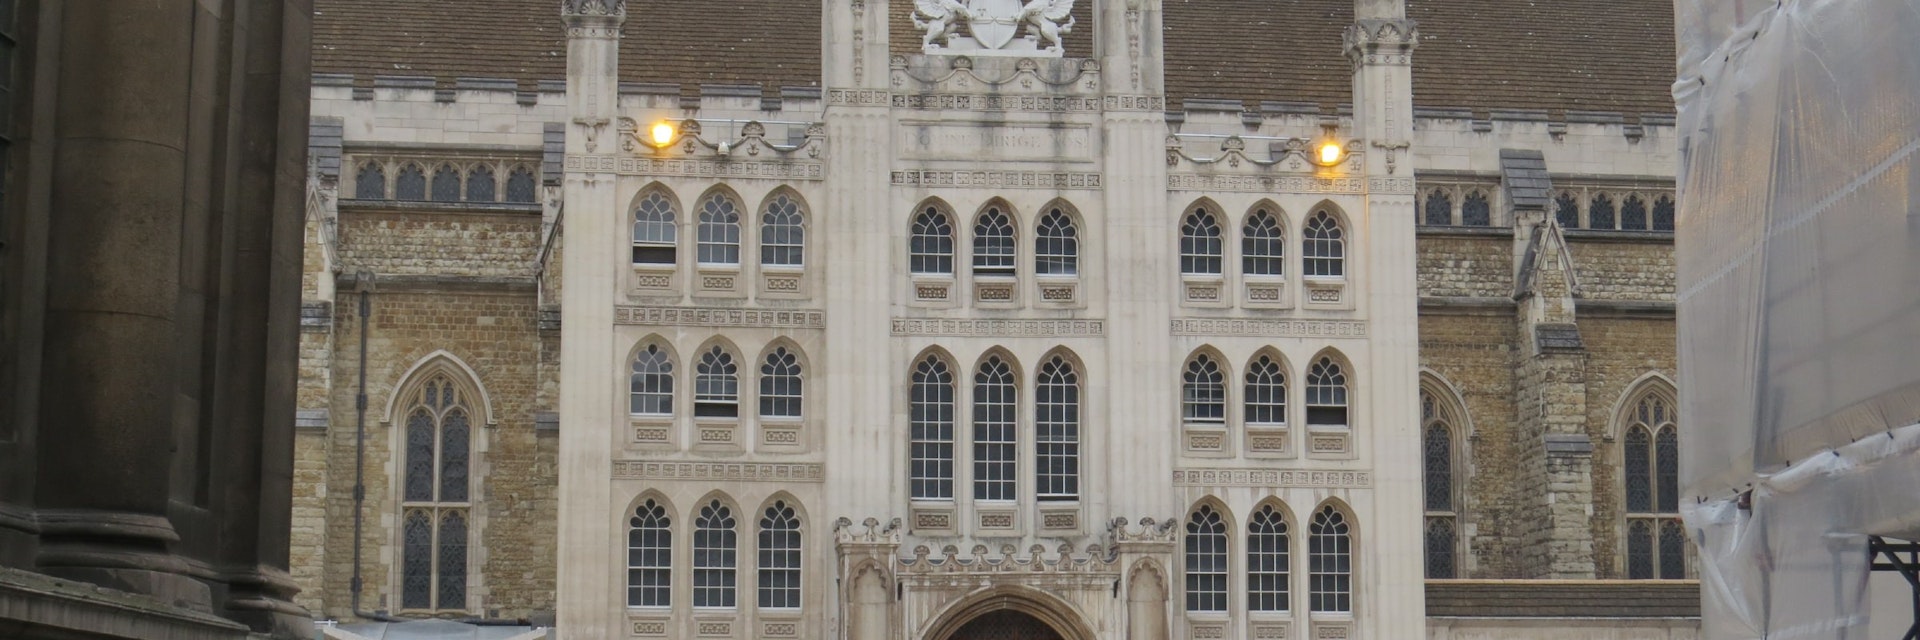 The southern side of the Guildhall